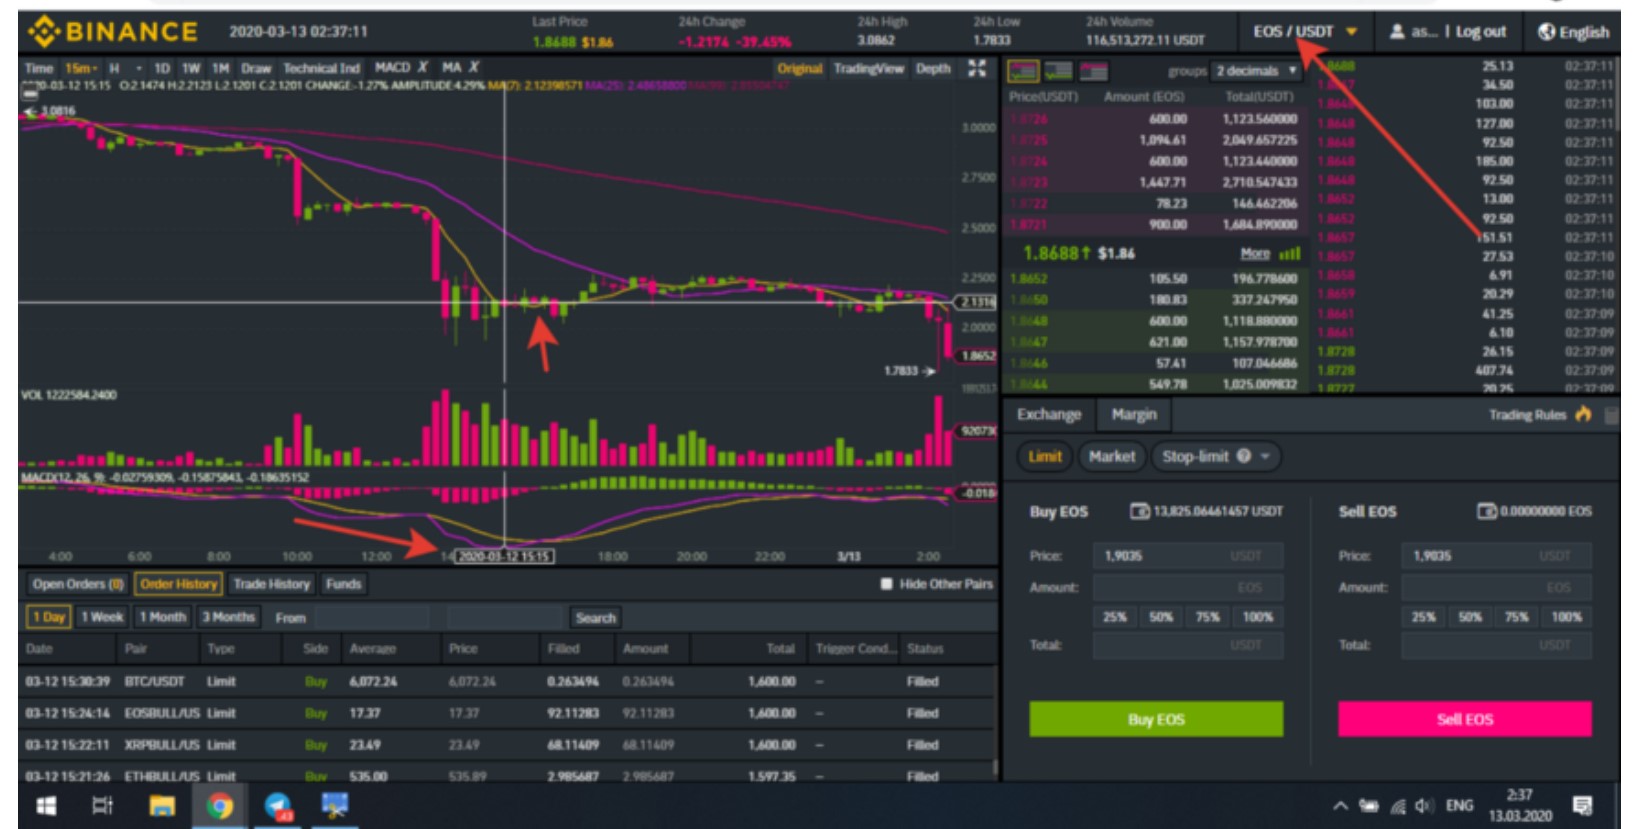 Casino at Binance or "How 3164.93 USDT disappeared in 1 hour"